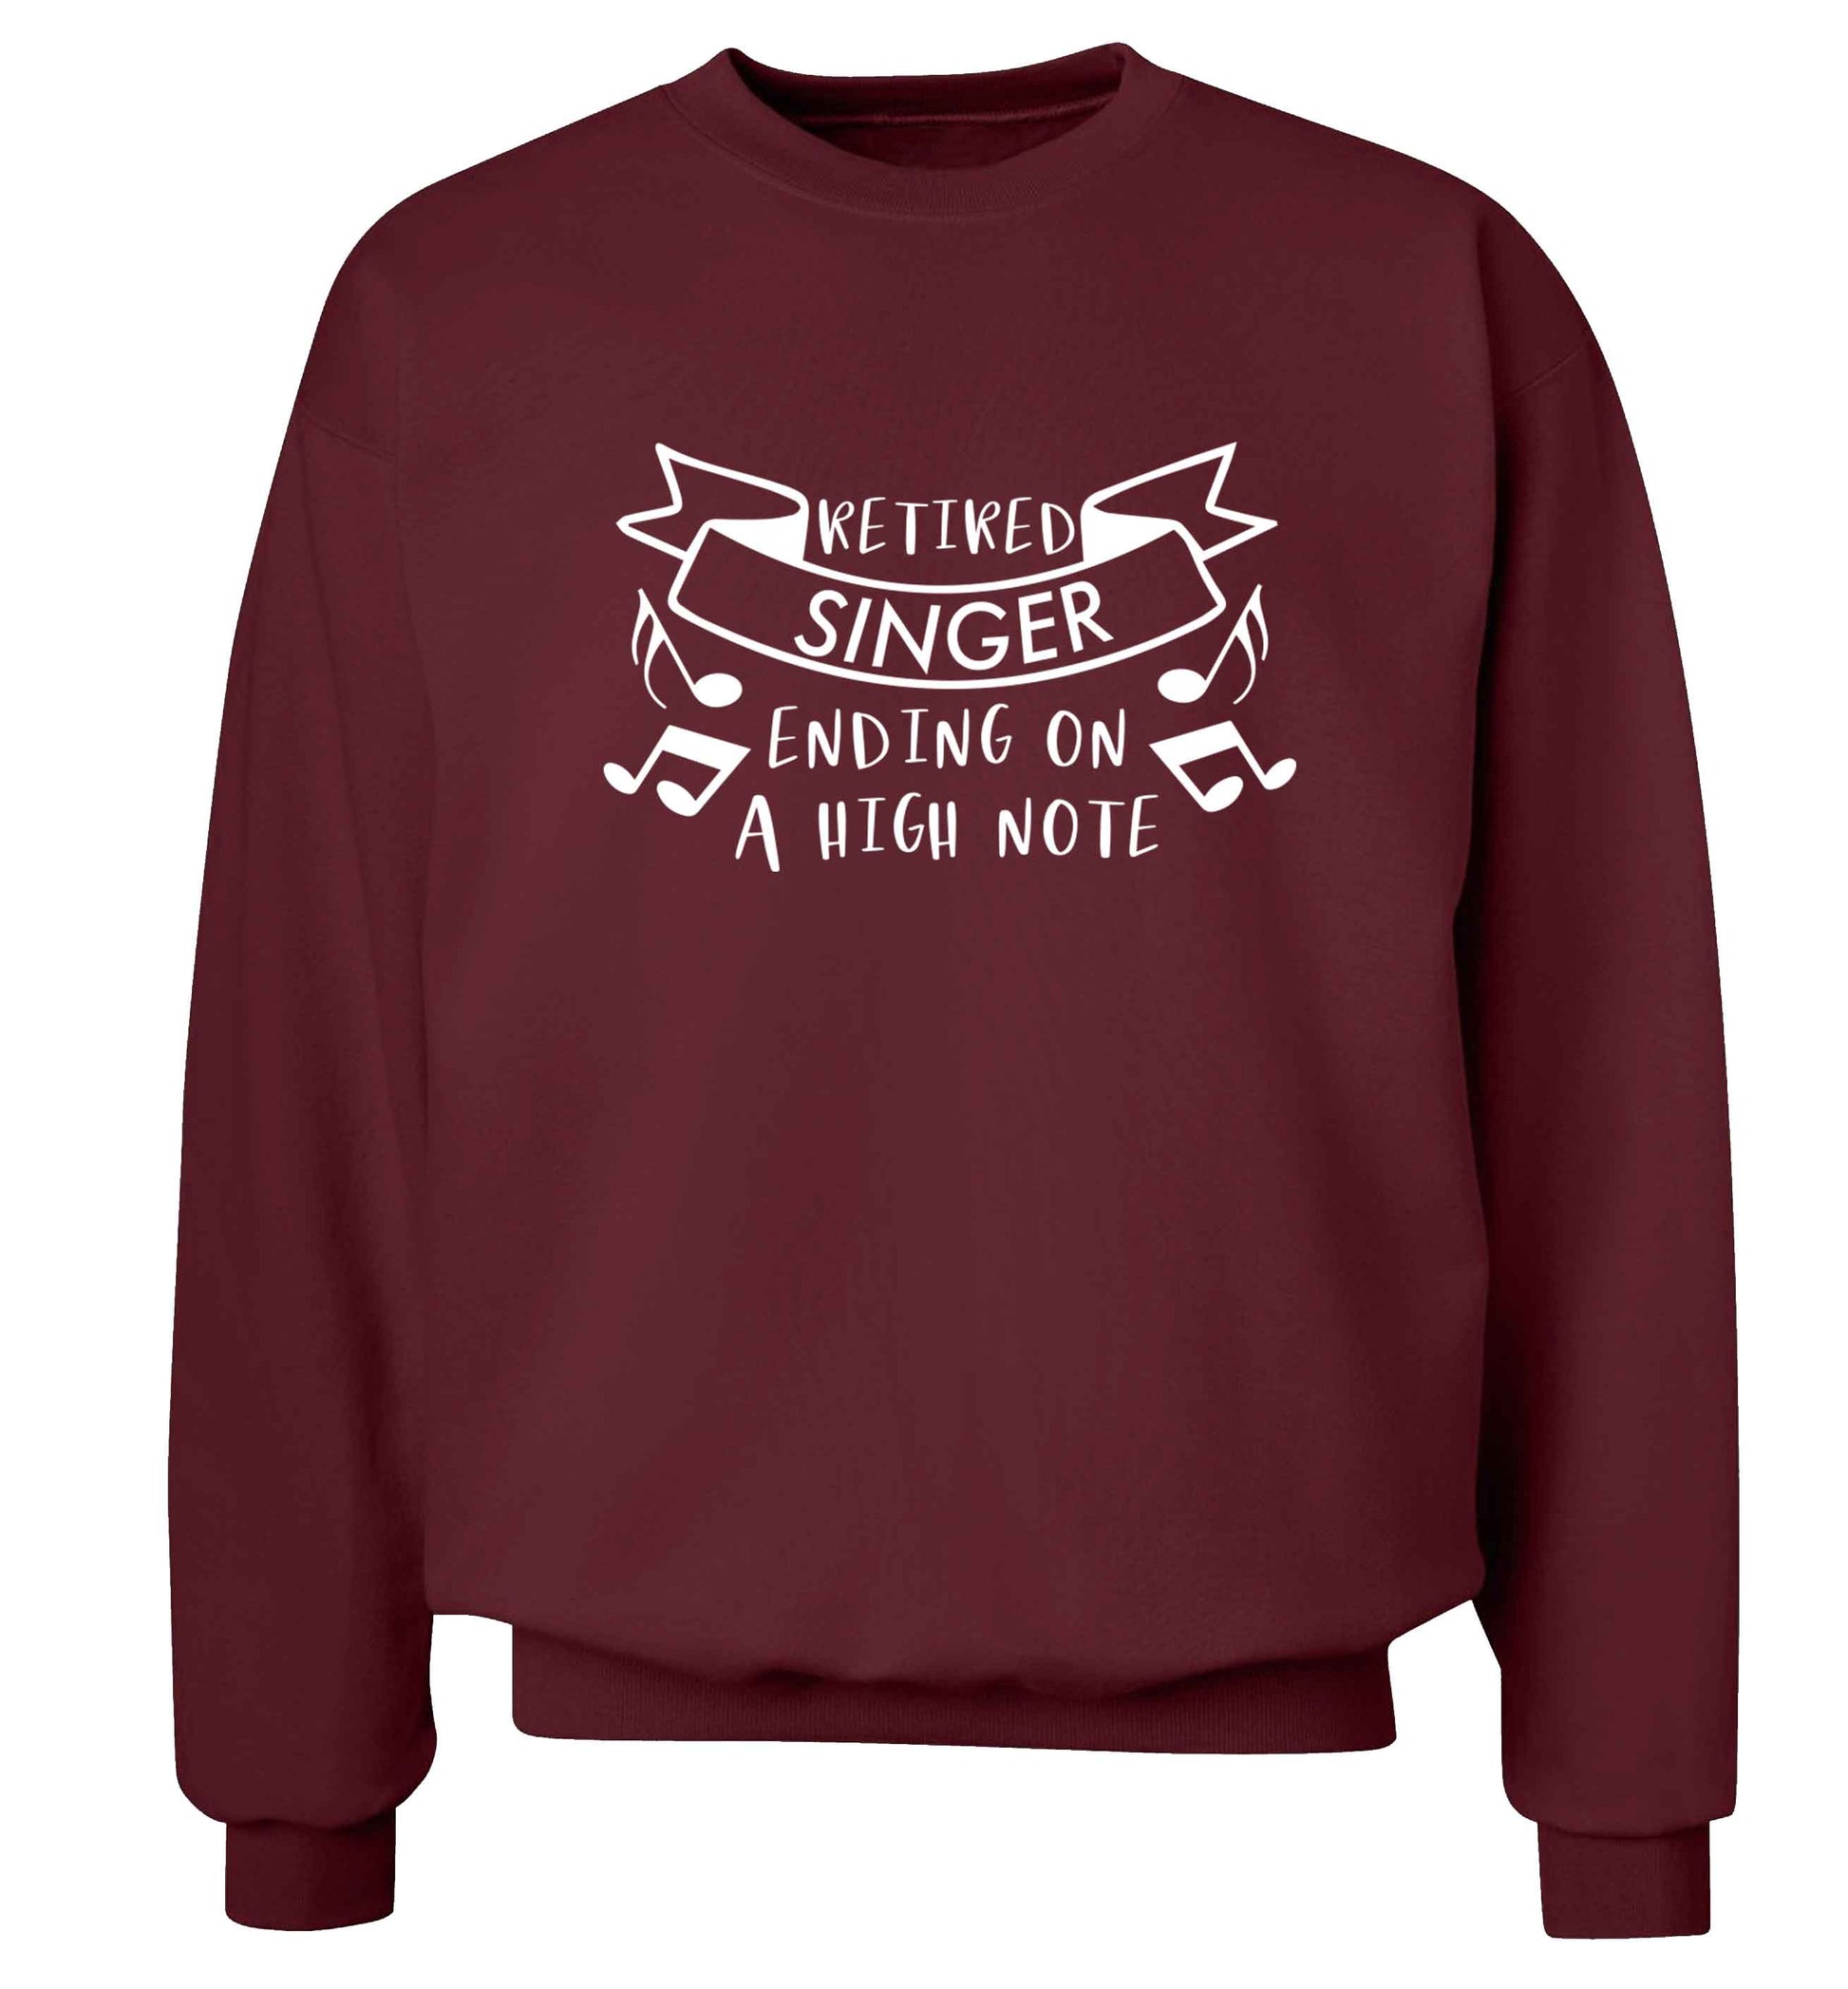 Retired singer ending on a high note Adult's unisex maroon Sweater 2XL